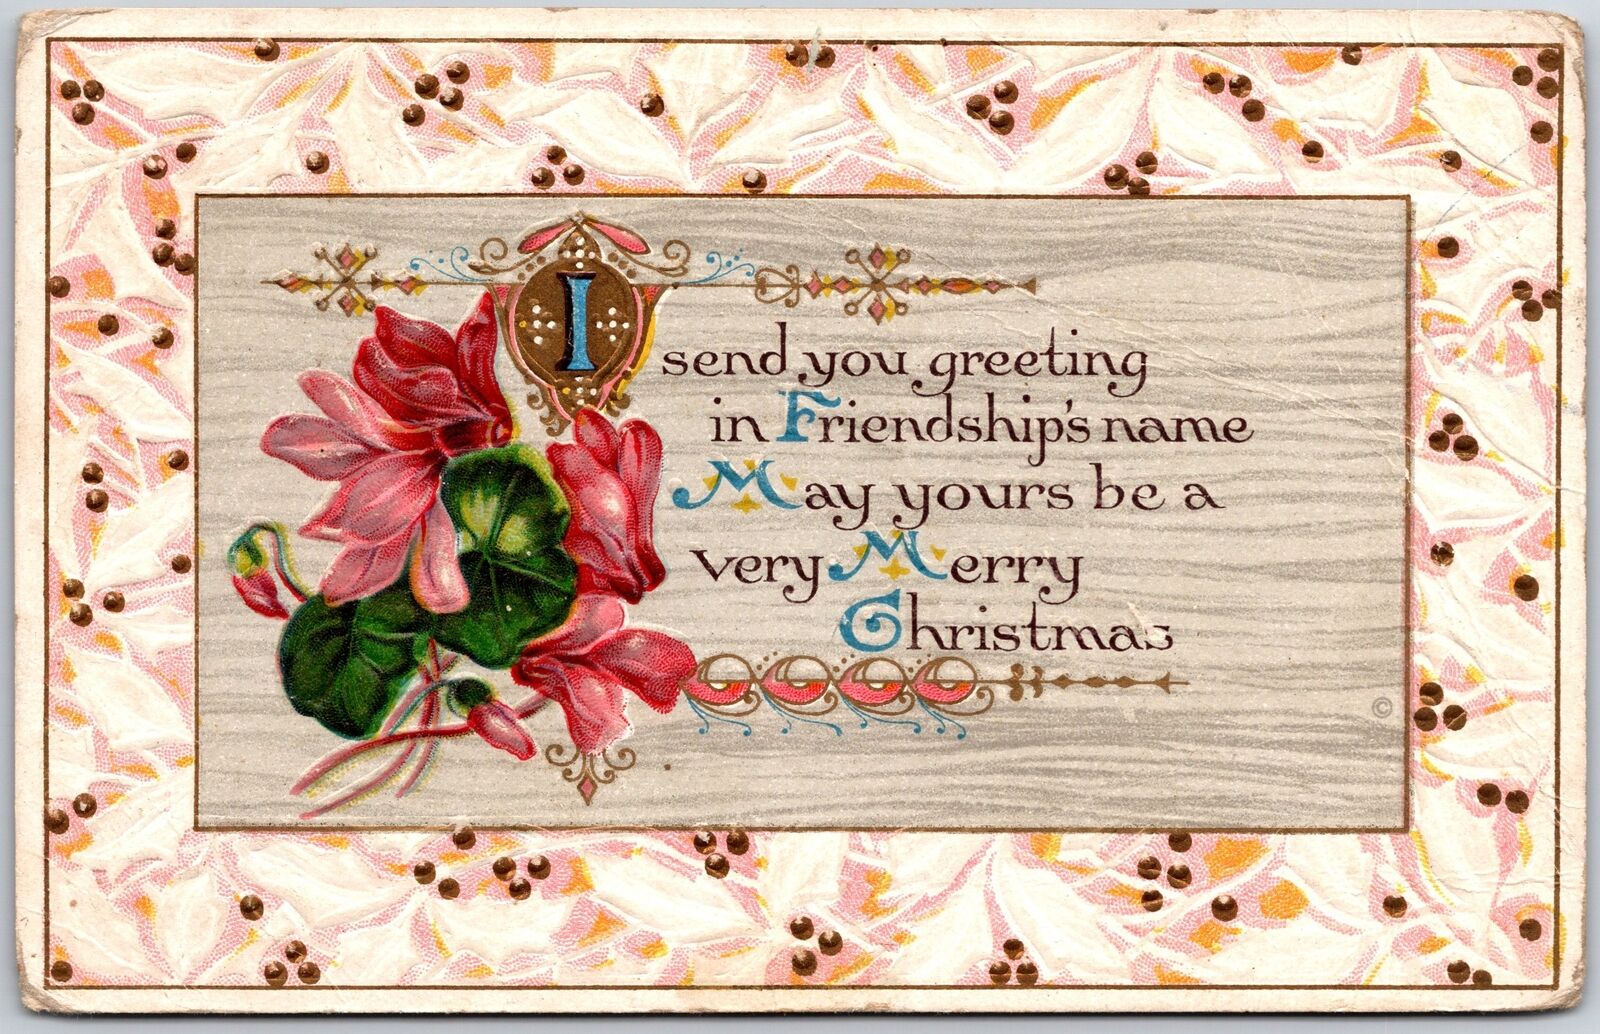 1908 Christmas Greetings Flower Landscape Pink Ribbon Greetings Posted Postcard